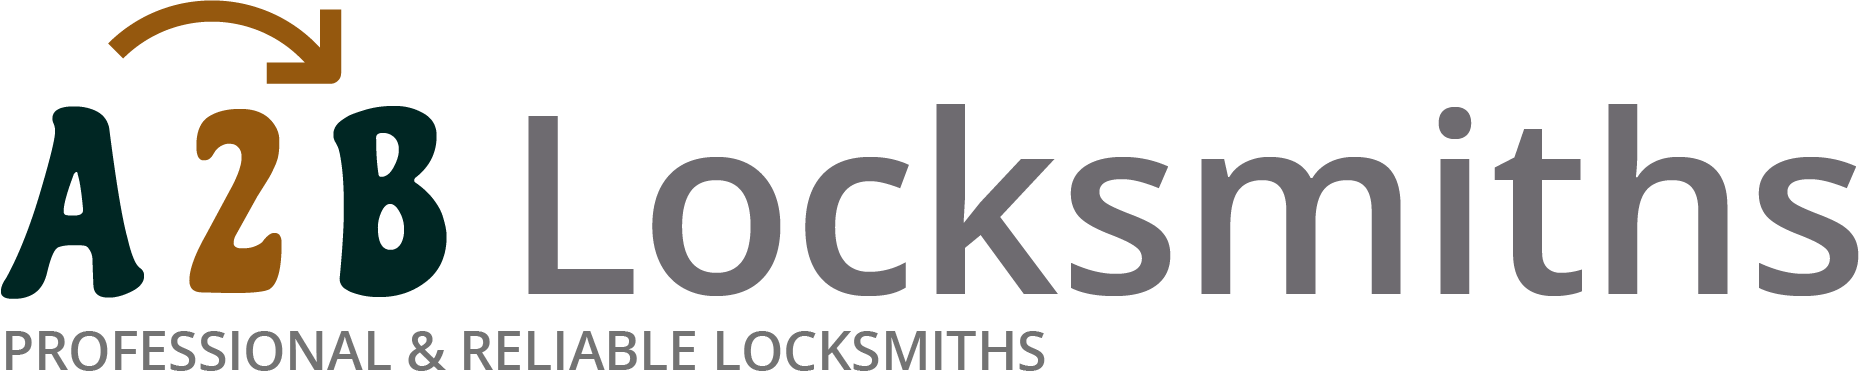 If you are locked out of house in Chesham, our 24/7 local emergency locksmith services can help you.